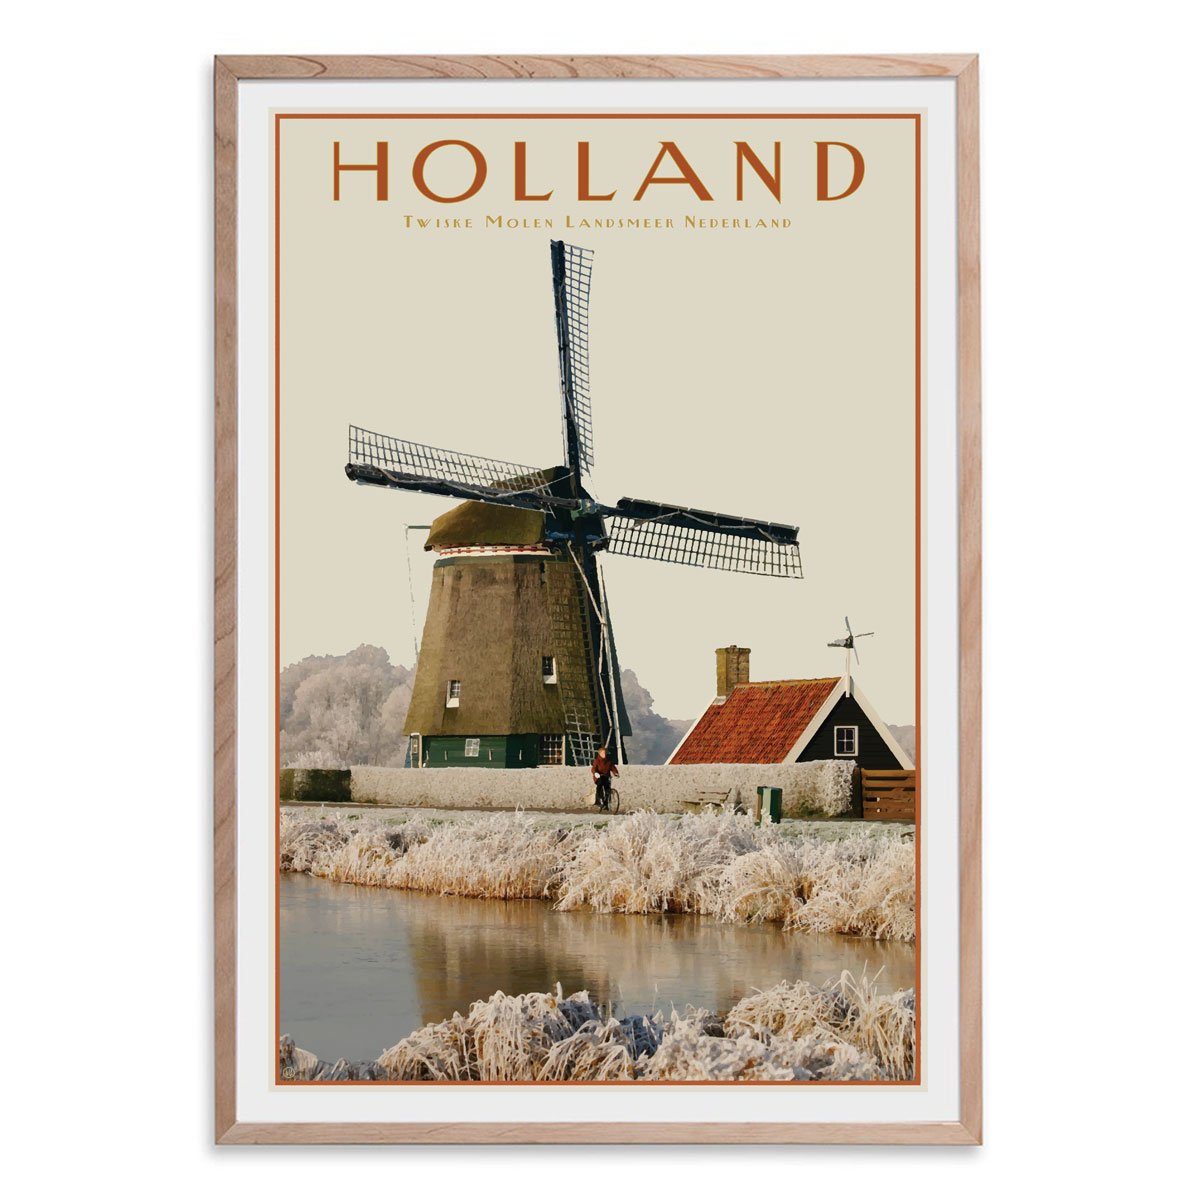 North Holland Windmill raw wood framed print. Vintage travel style poster. Original design by places we luv